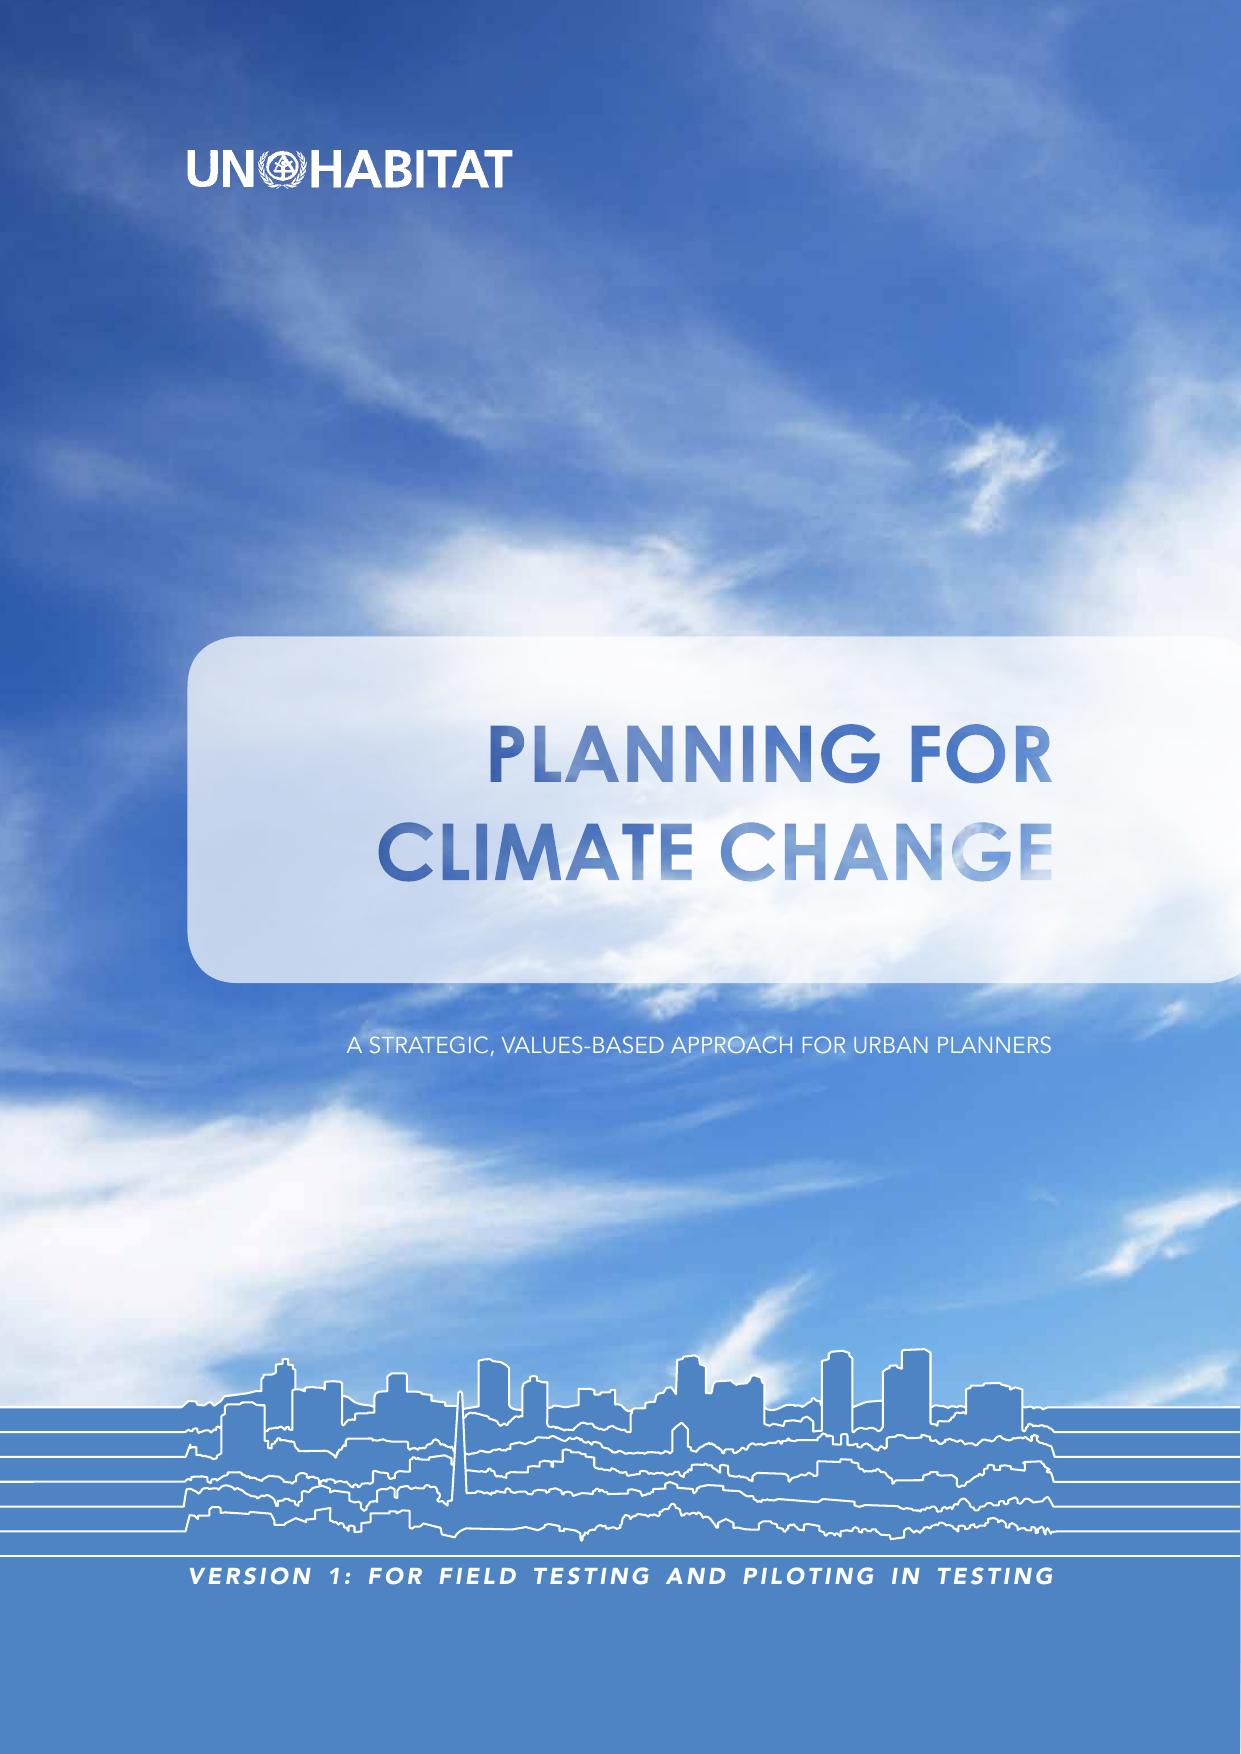 PLANNING FOR CLIMATE CHANGE